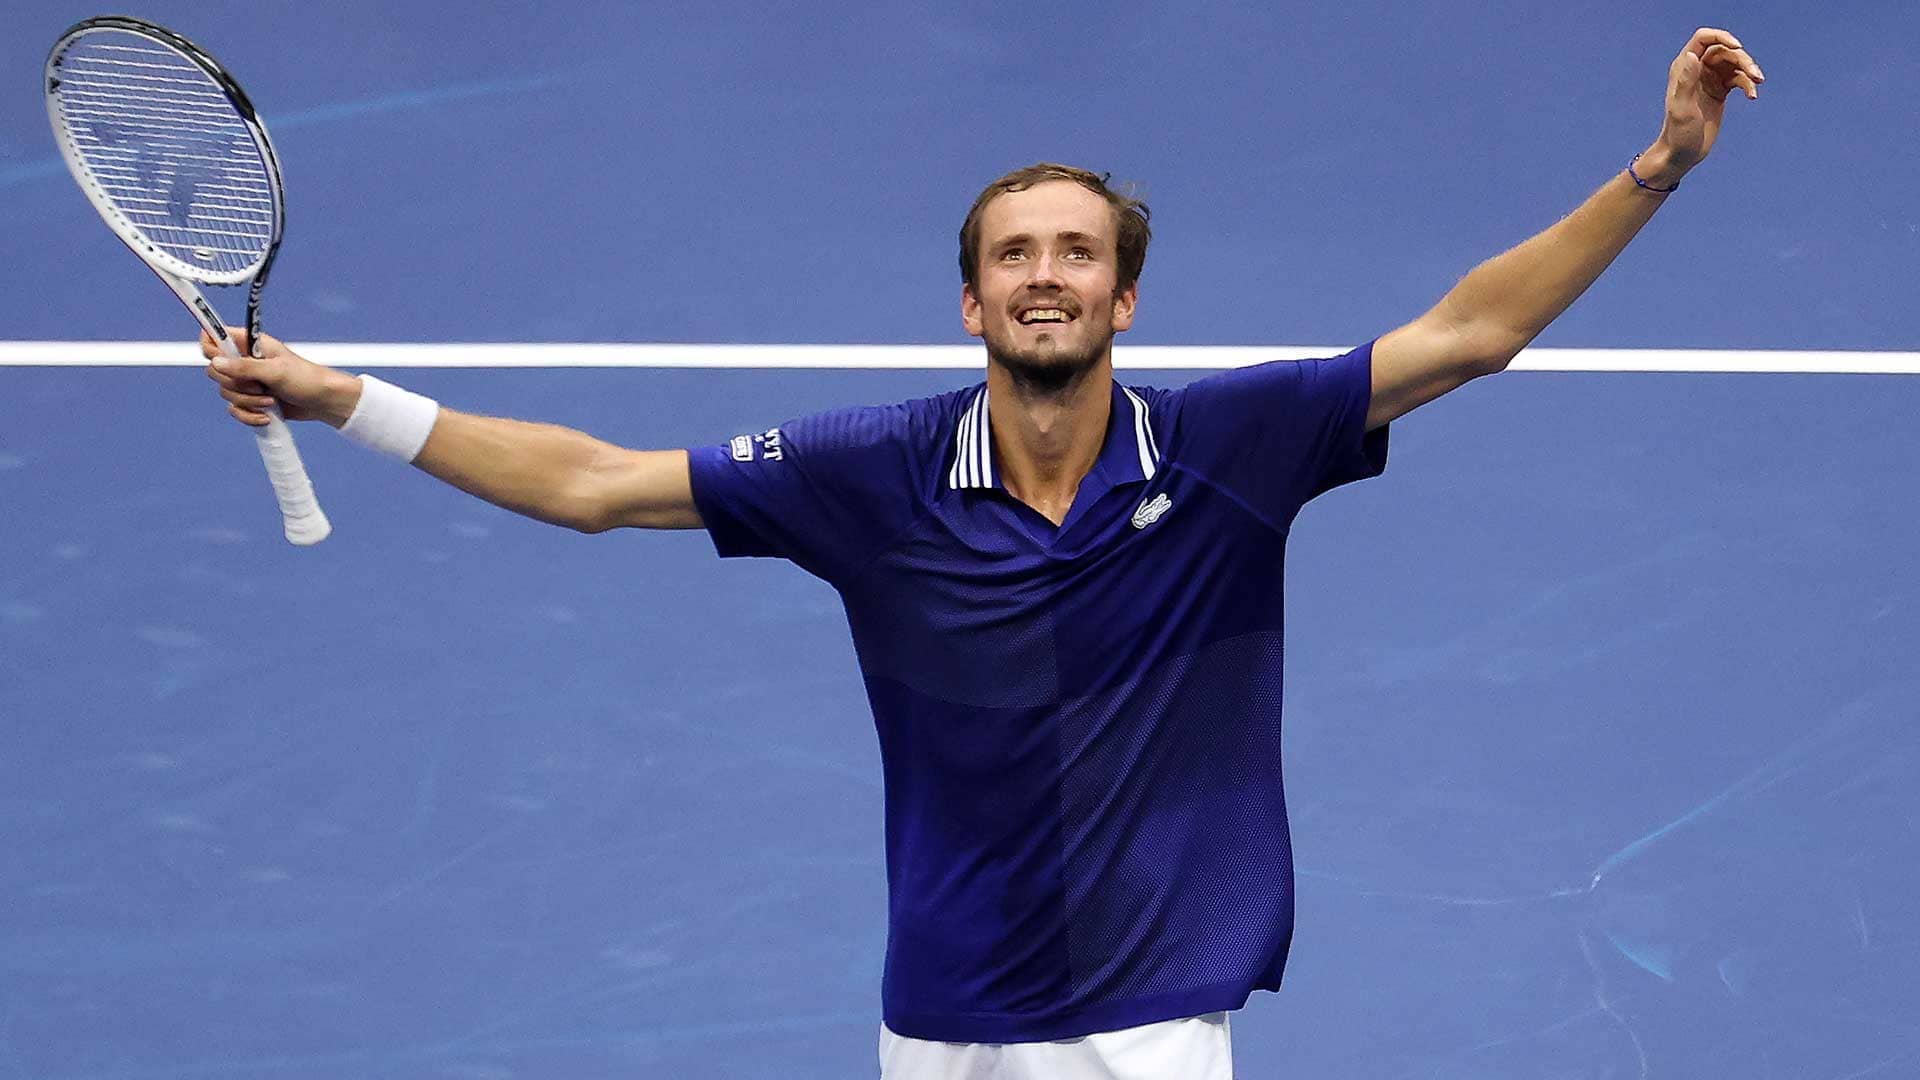 Daniil Medvedev is the 27th player to reach World No. 1 in the ATP Rankings